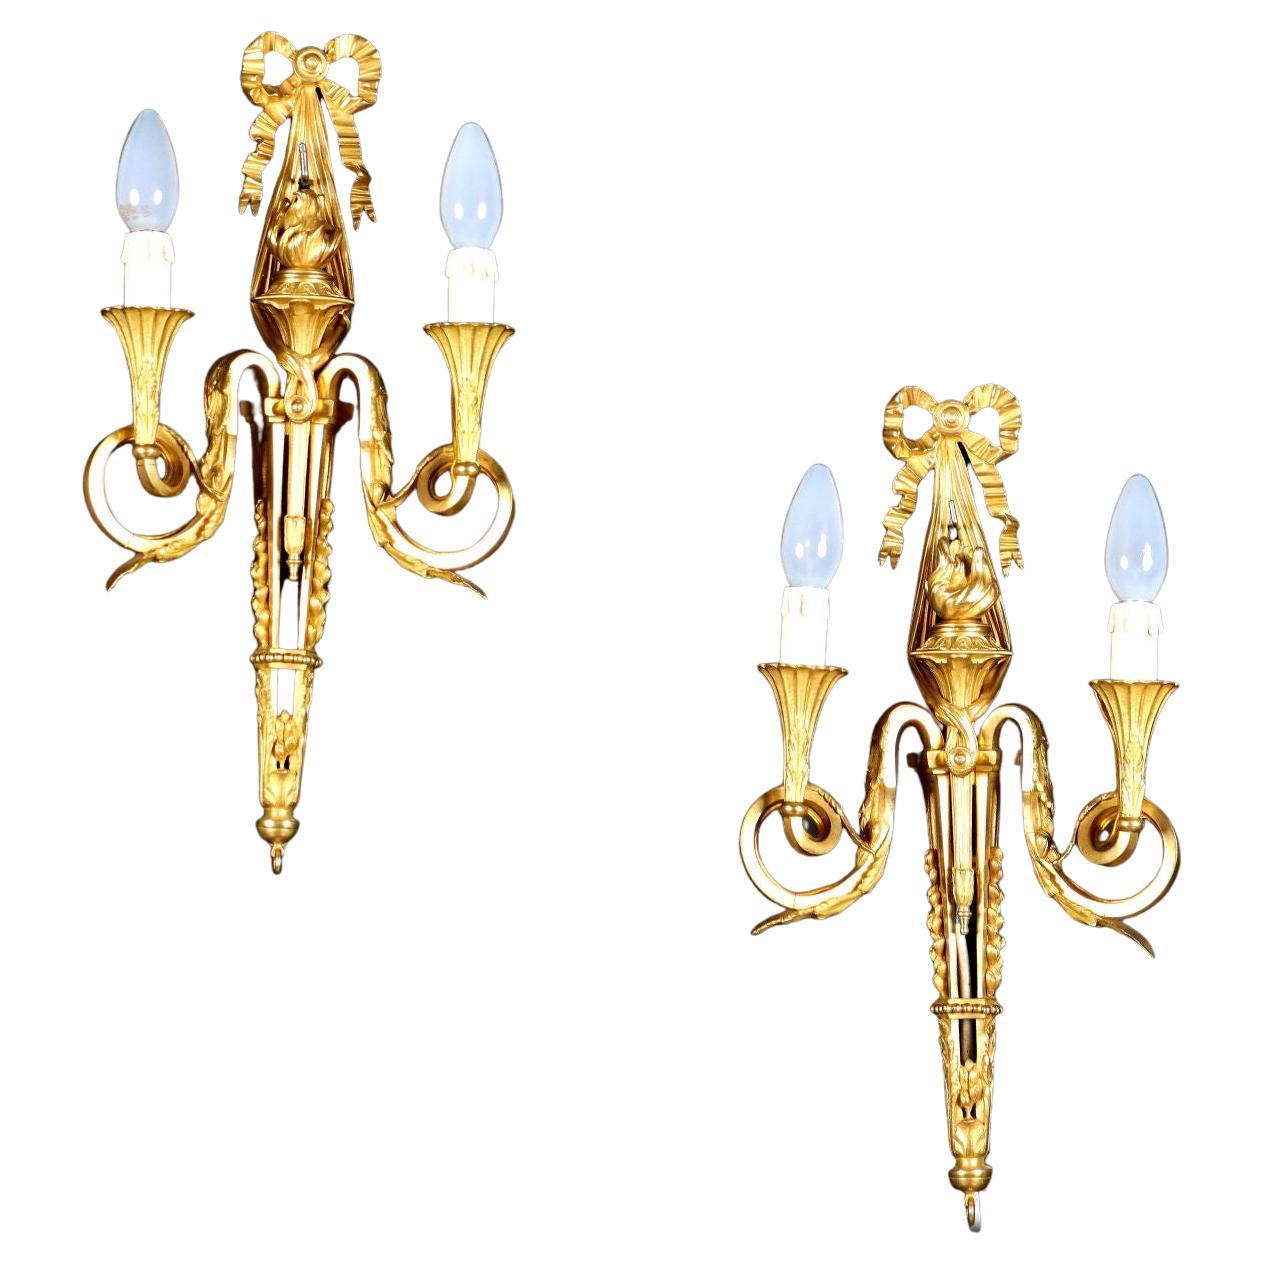 Ancient 2 Lights Wall Lamps Neoclassical Style '900 Gilded Bronze For Sale